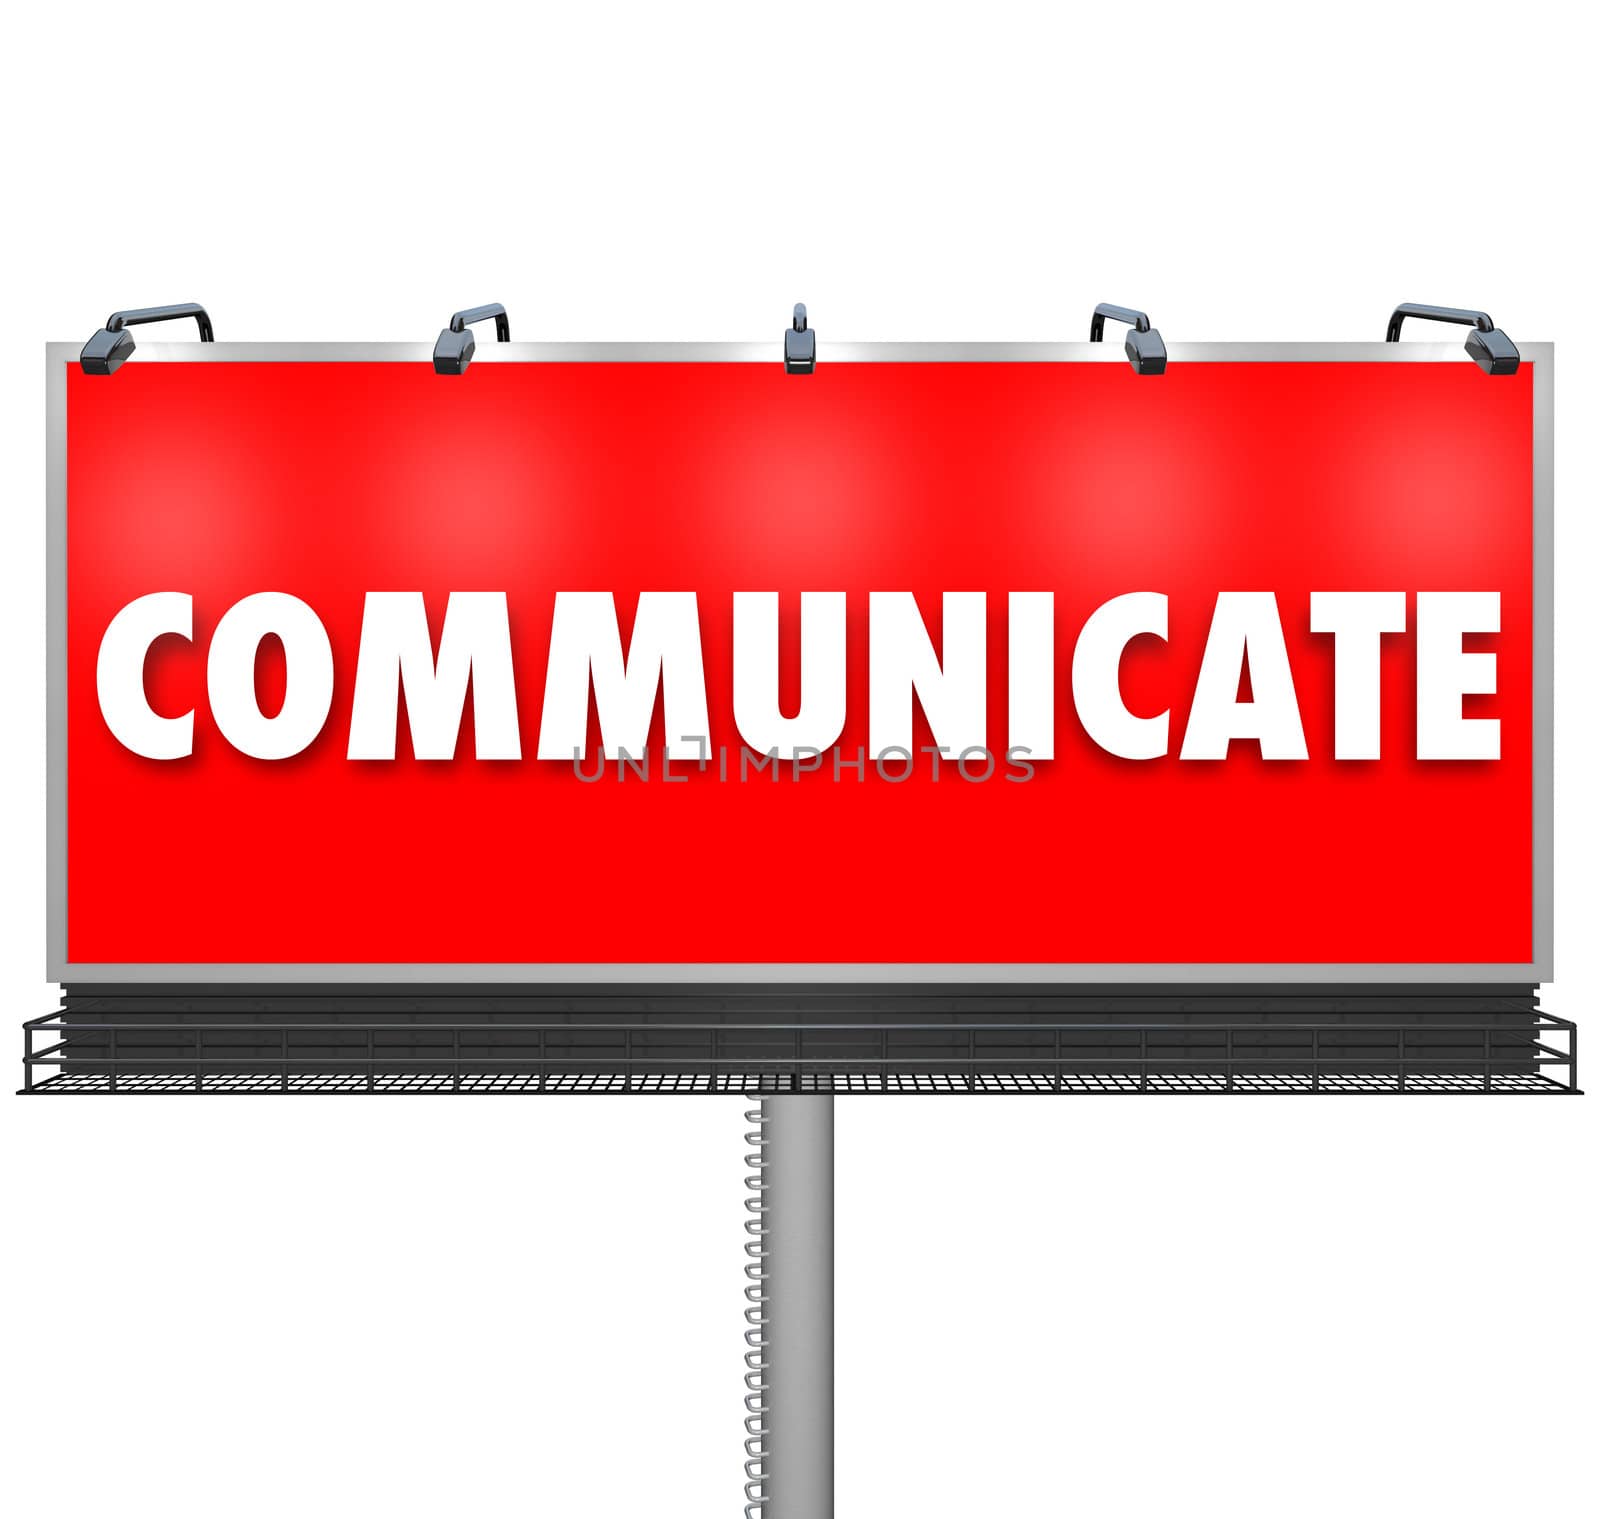 A huge red outdoor billboard displays the word Communicate to share an idea, build awareness of a problem or concern, or advertise a new product